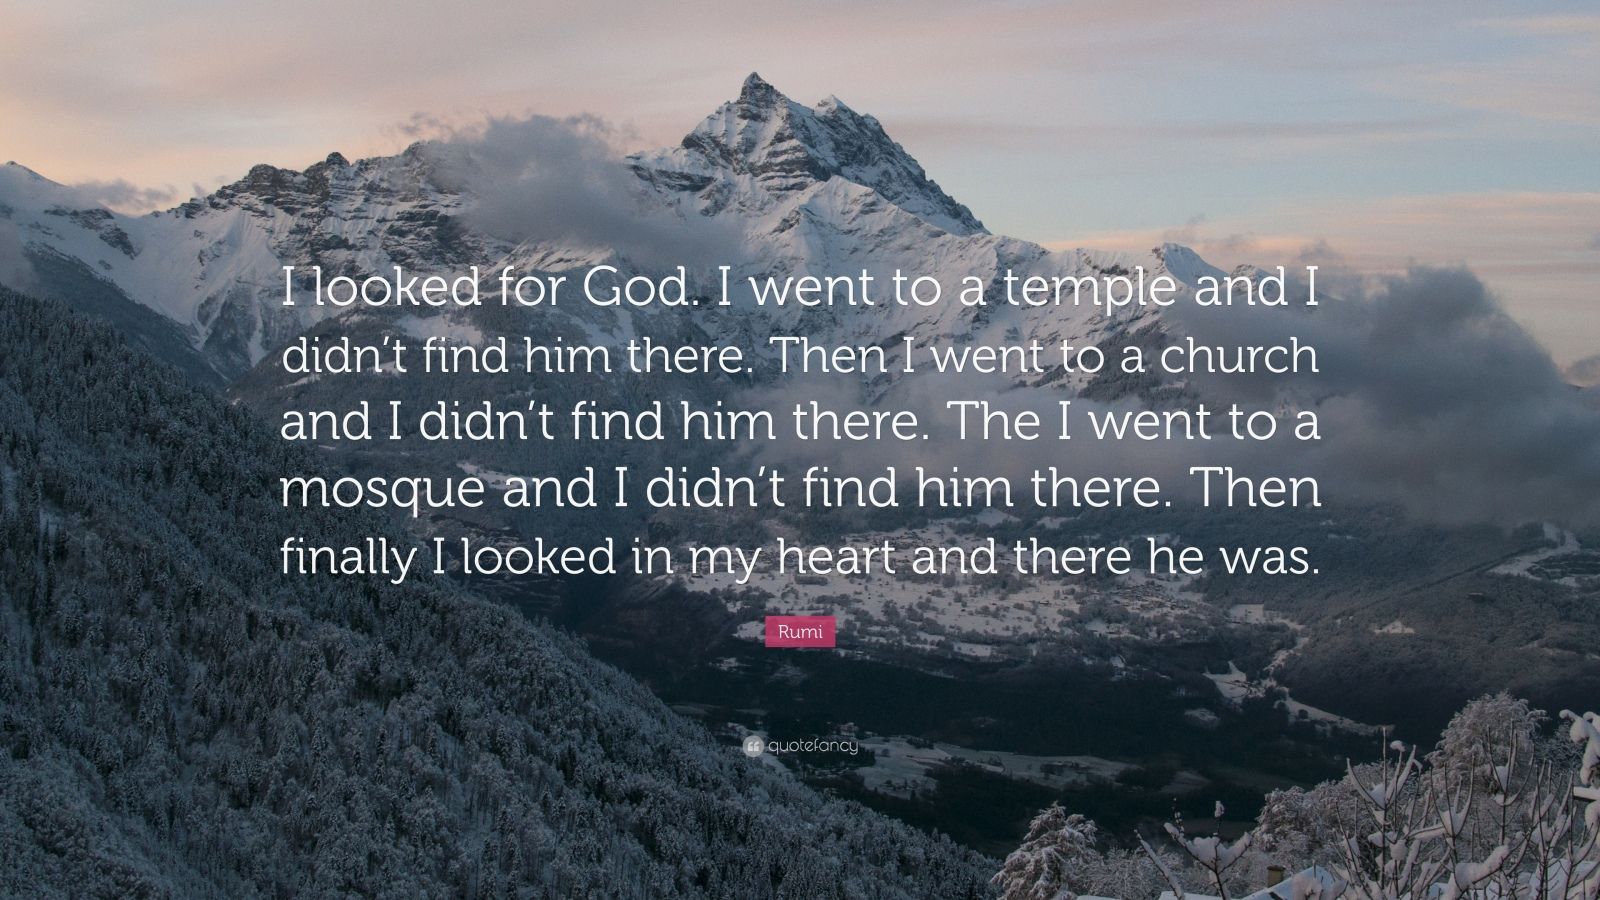 Rumi Quote: “I looked for God. I went to a temple and I didn’t find him